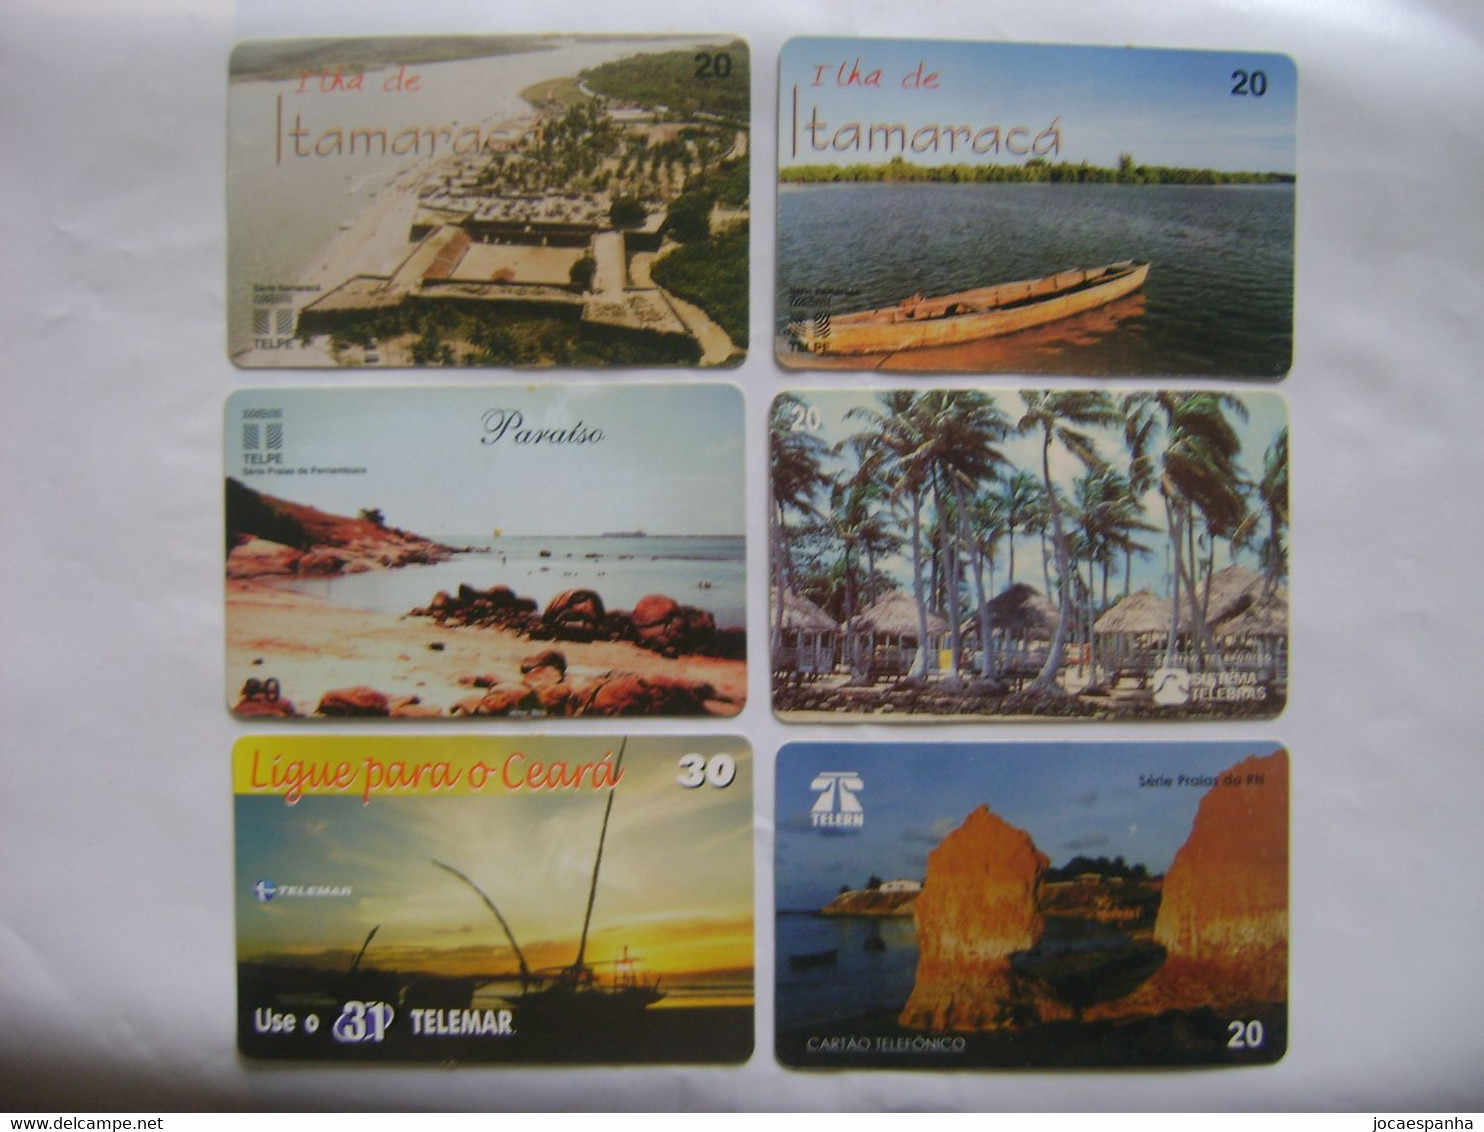 BRAZIL / BRASIL - 10 PHONE CARDS BEACHES, VARIOUS OPERATORS - 1996 TO 2001 - Landscapes